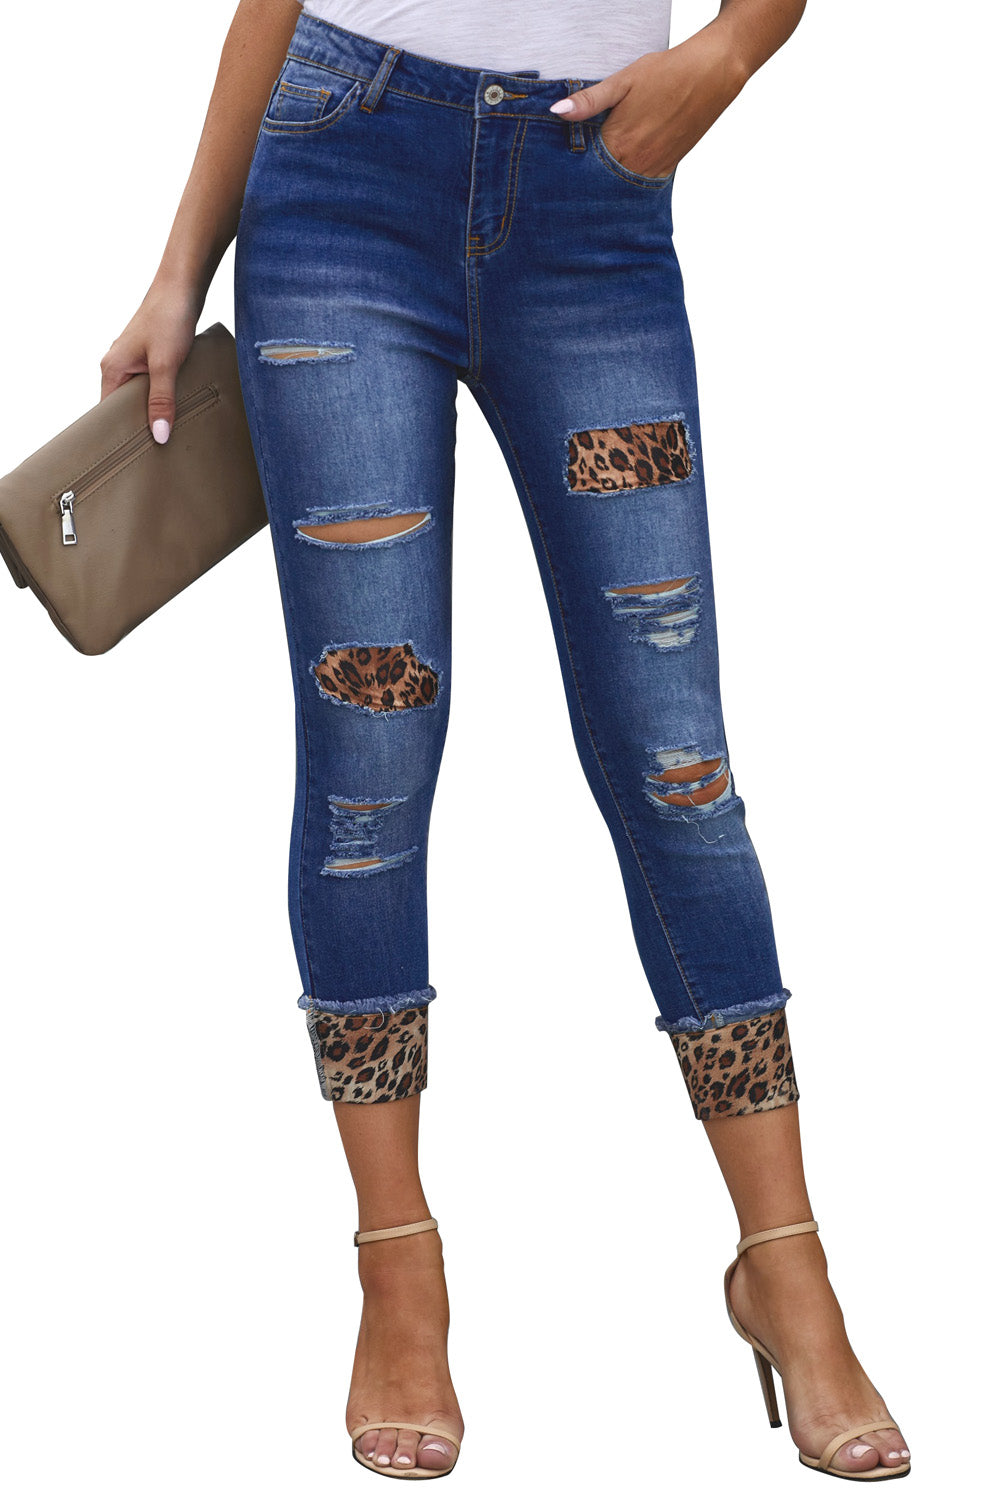 Distressed Leopard Patches Blue Skinny Jeans